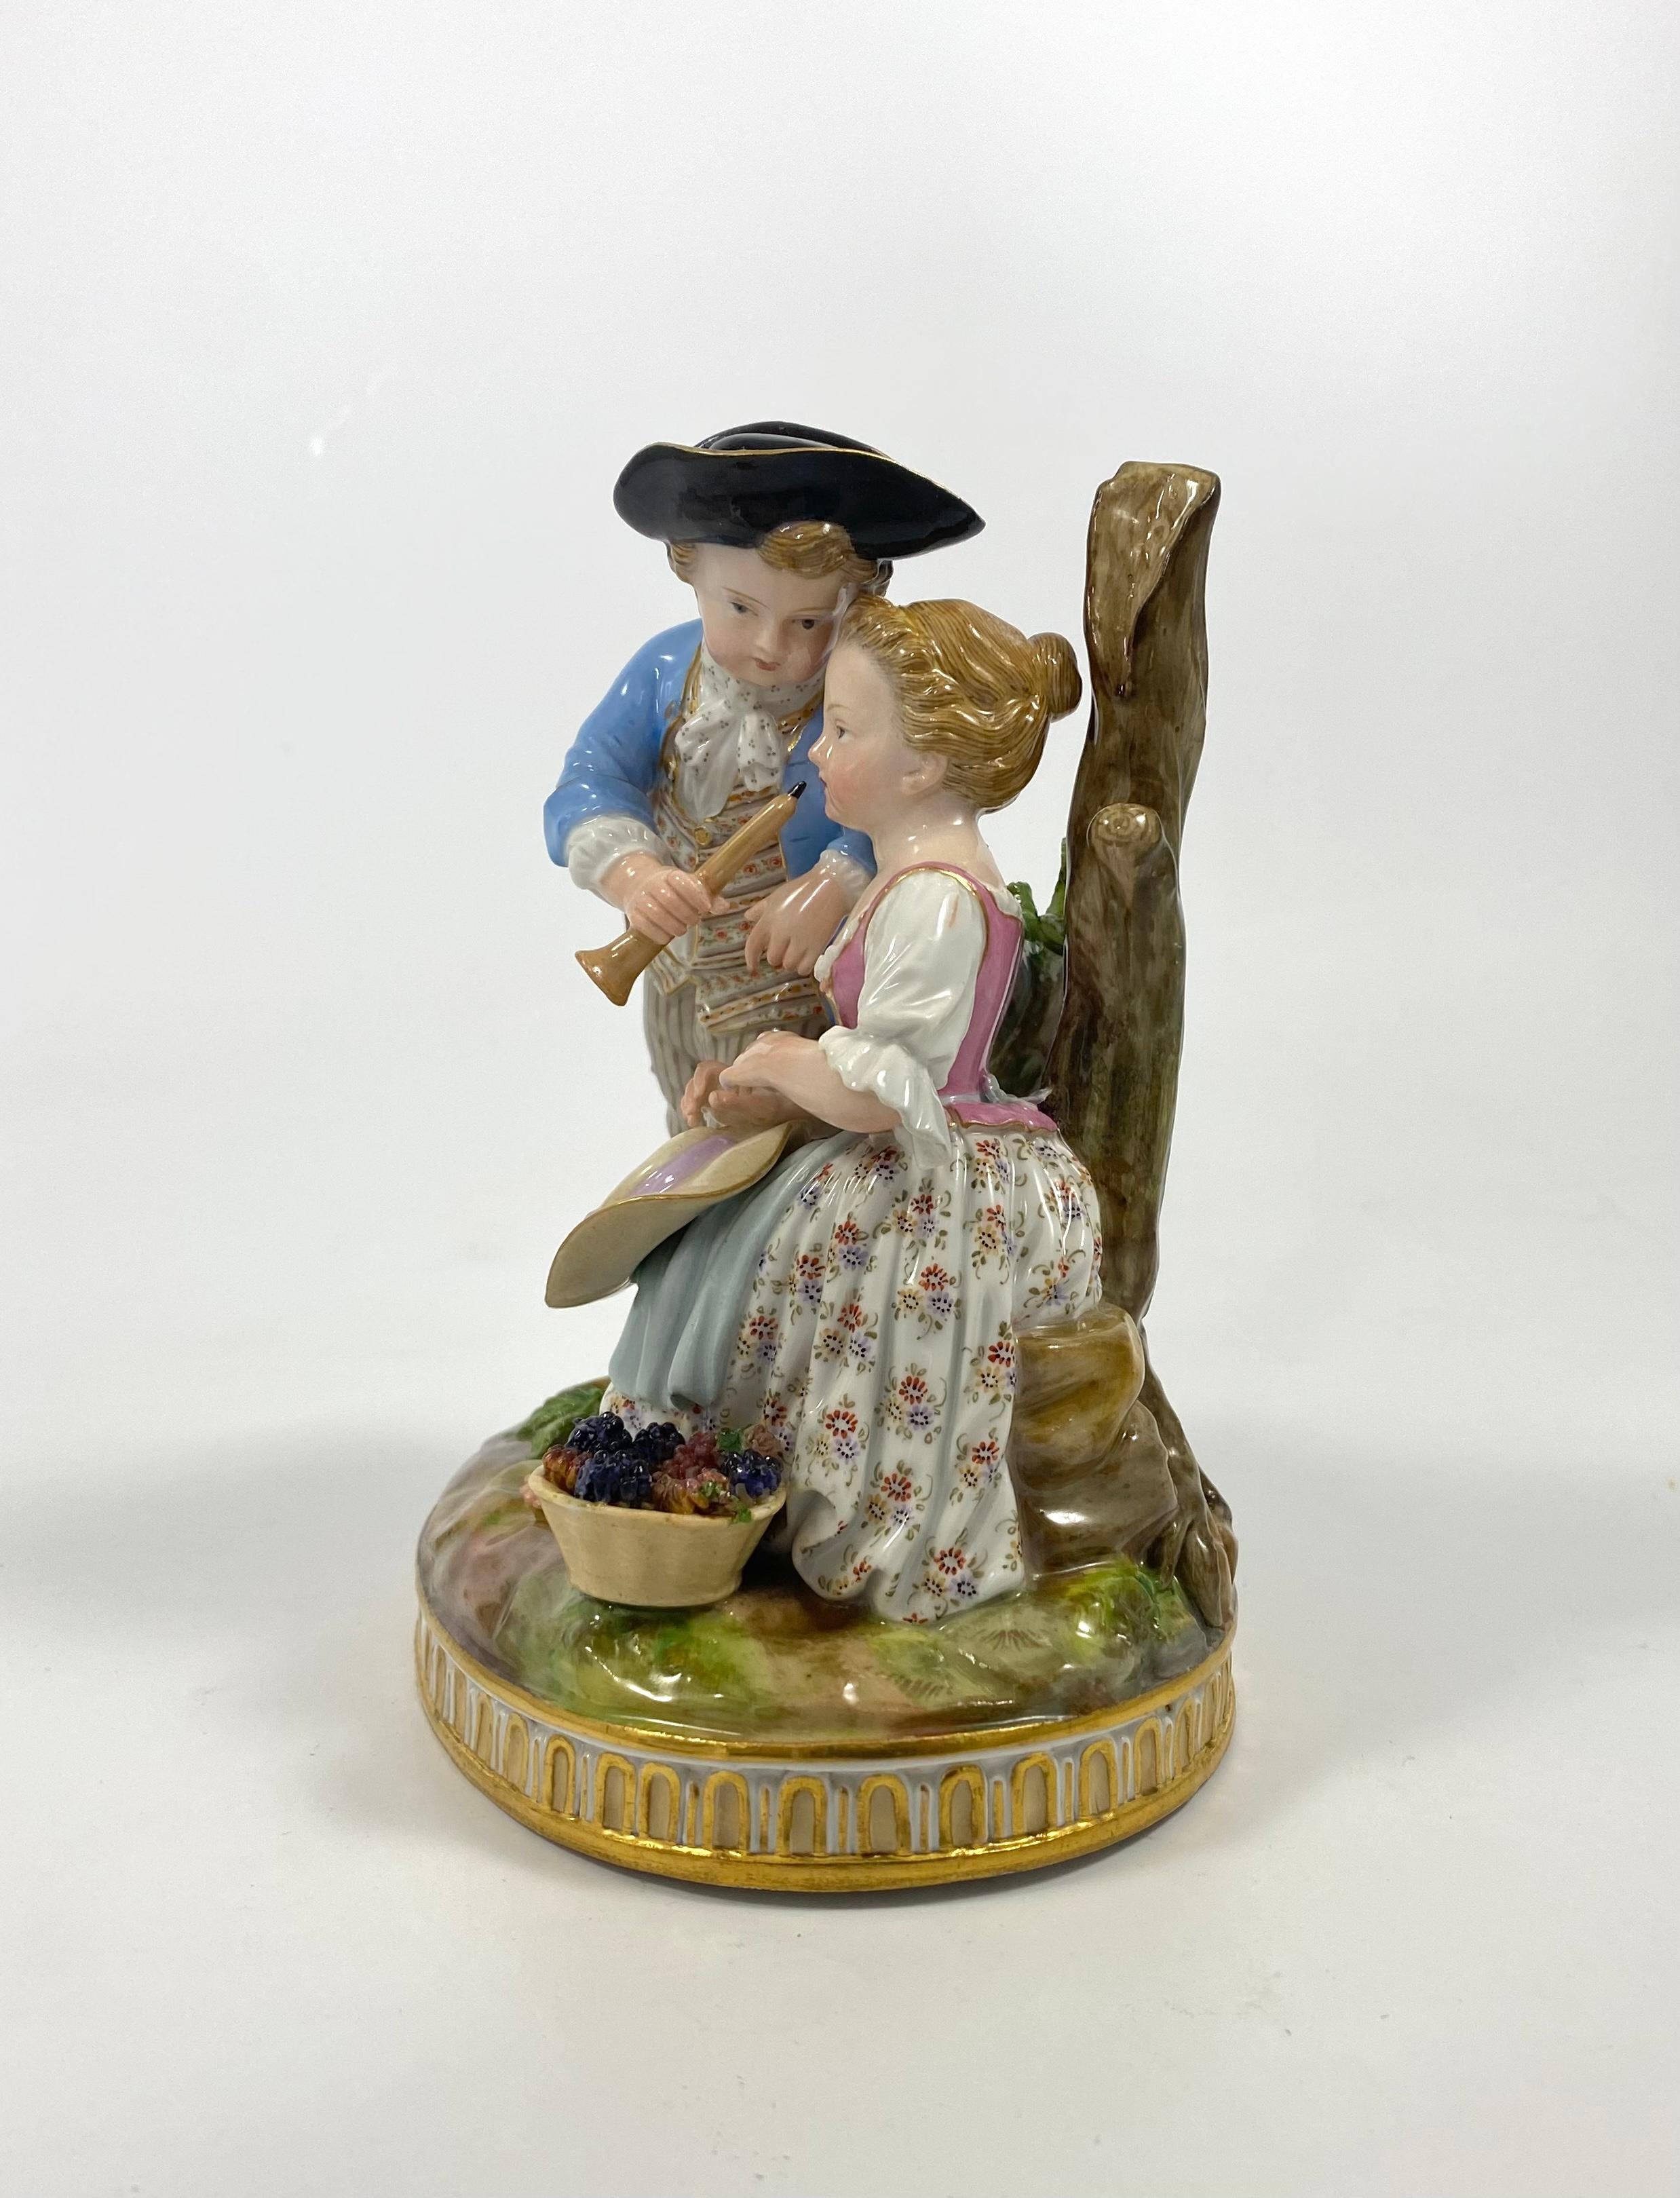 Meissen porcelain figure group, c. 1880. Finely modelled as two children wearing 18th Century costume. The boy offers the girl pipe to play, whilst she seats next to a basket of grapes.
The figure is set upon a grassy mound oval base, edged with